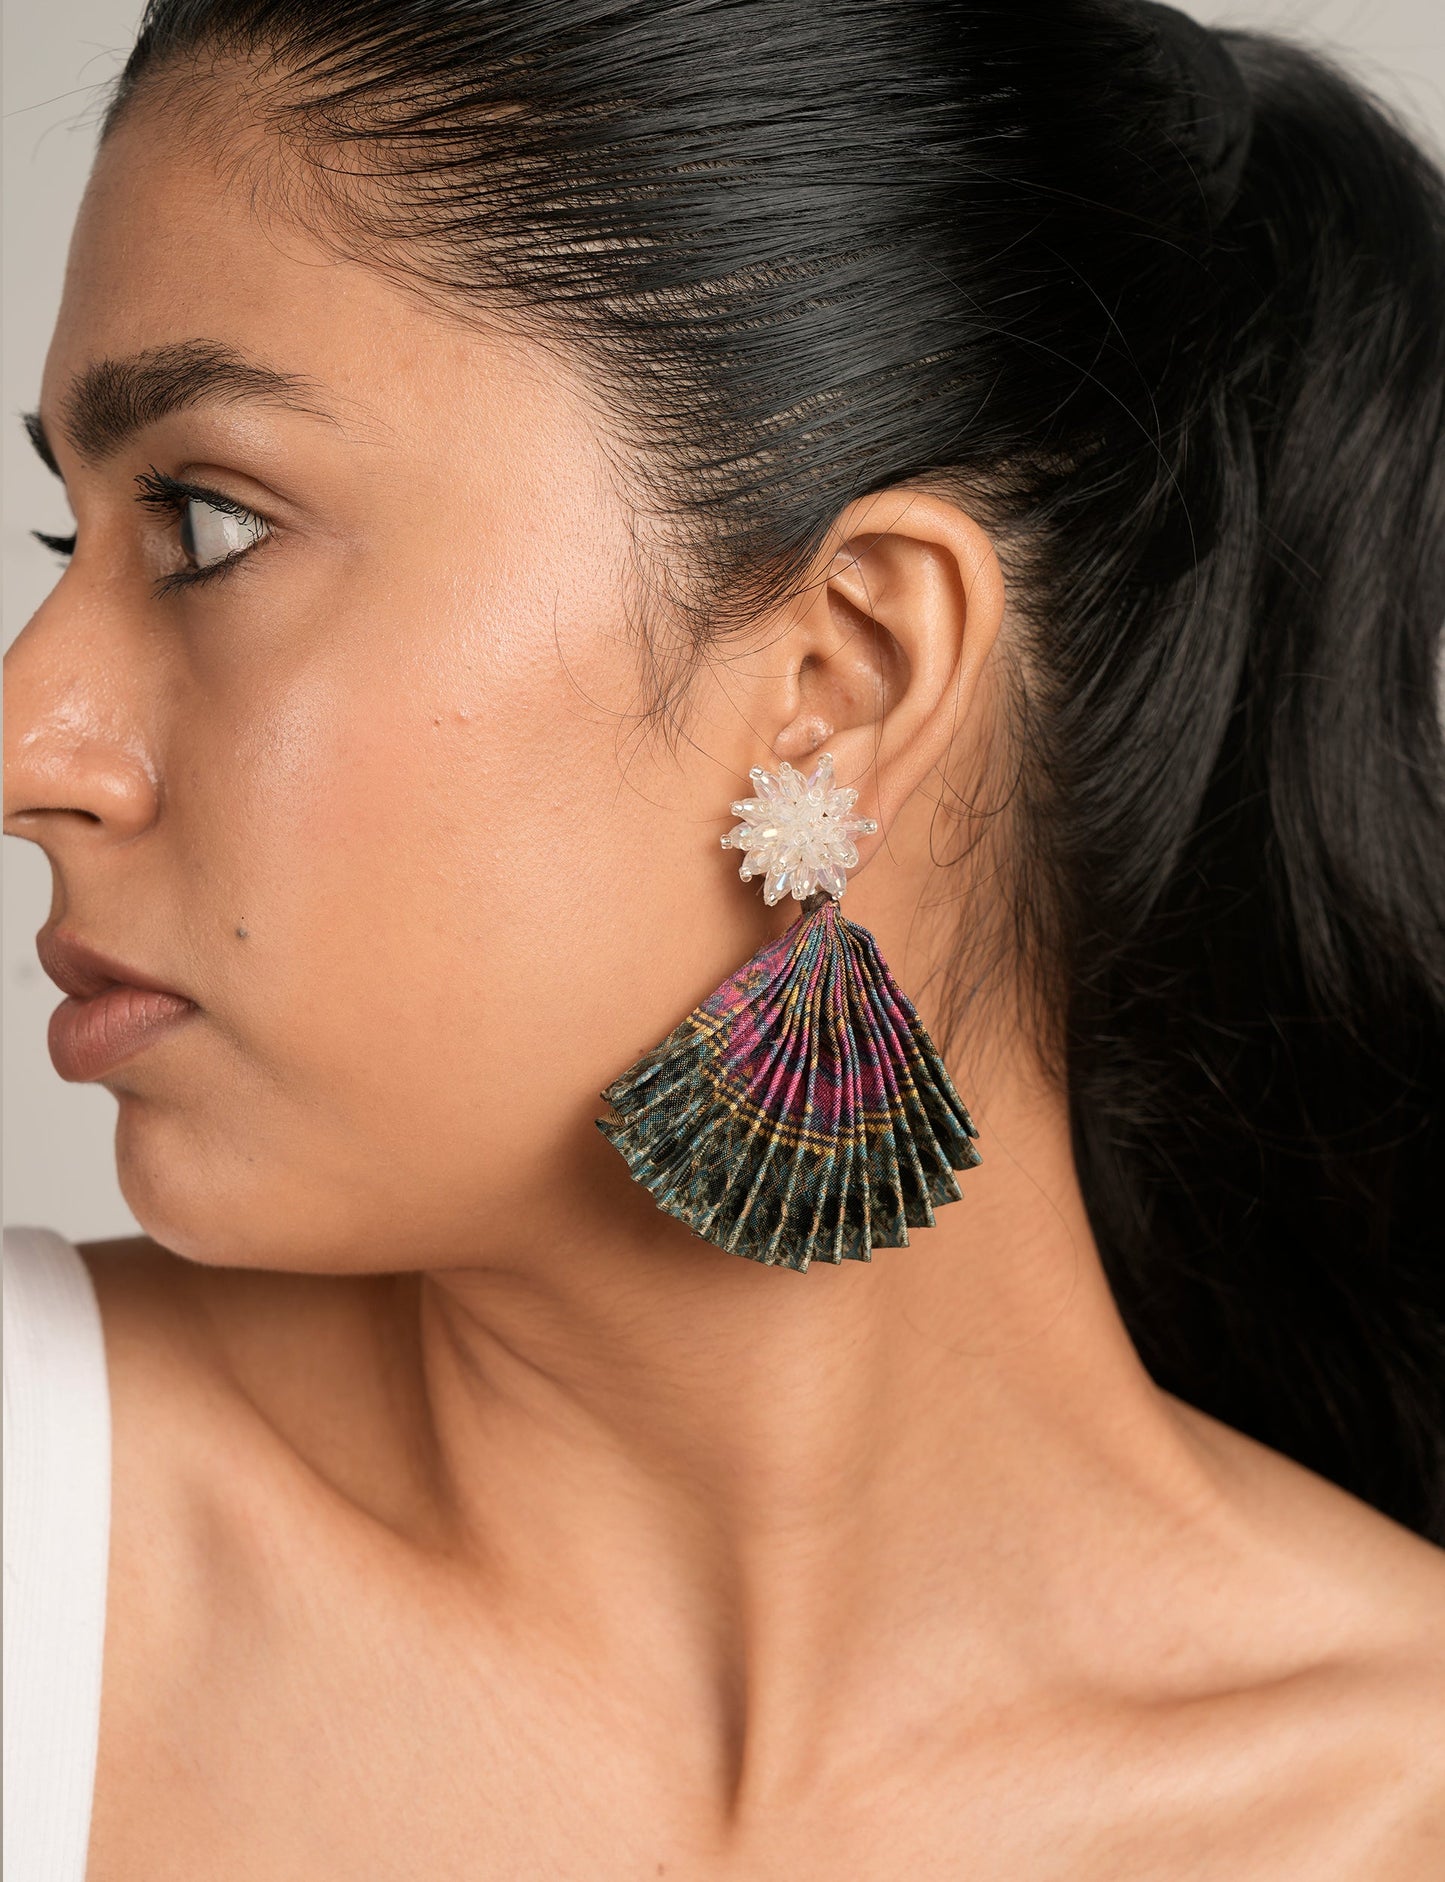 Adorn yourself sustainably with our PLEATED EARRINGS – classic wonders made of Indian saris, now featuring a floret stud at the top. A blend of ethical clothing, green fashion, and slow fashion, these earrings add a touch of class to consciousness, nodding to circular fashion techniques. Fastened with hypoallergy tested metal hooks, nickel, and lead-free for a conscious and stylish accessory.